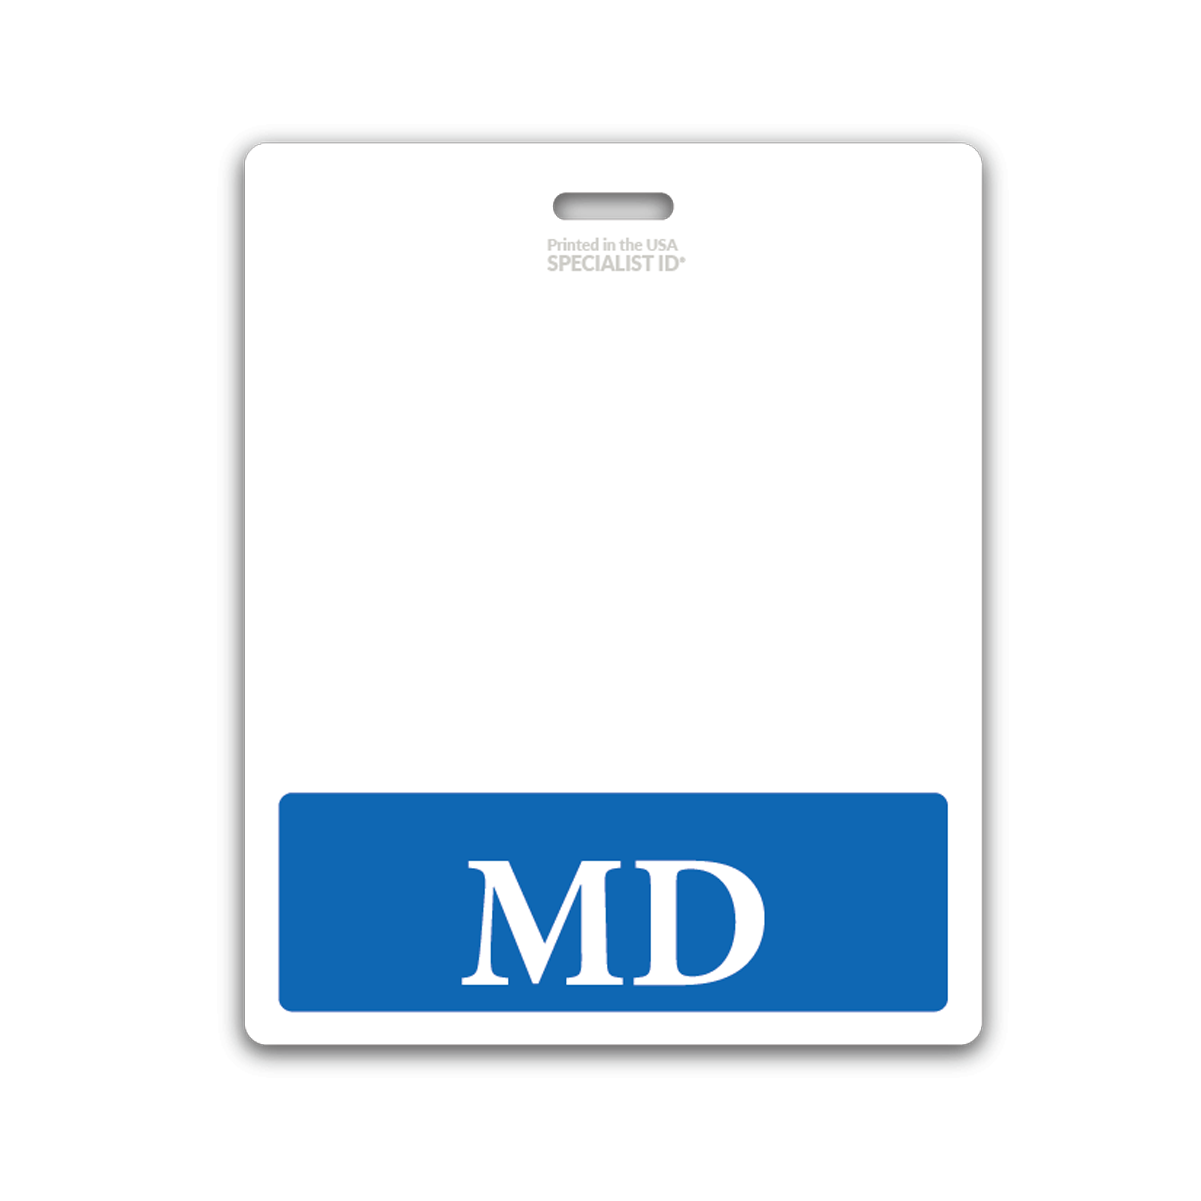 extra large and Long MD badge buddy with blue border - double side print